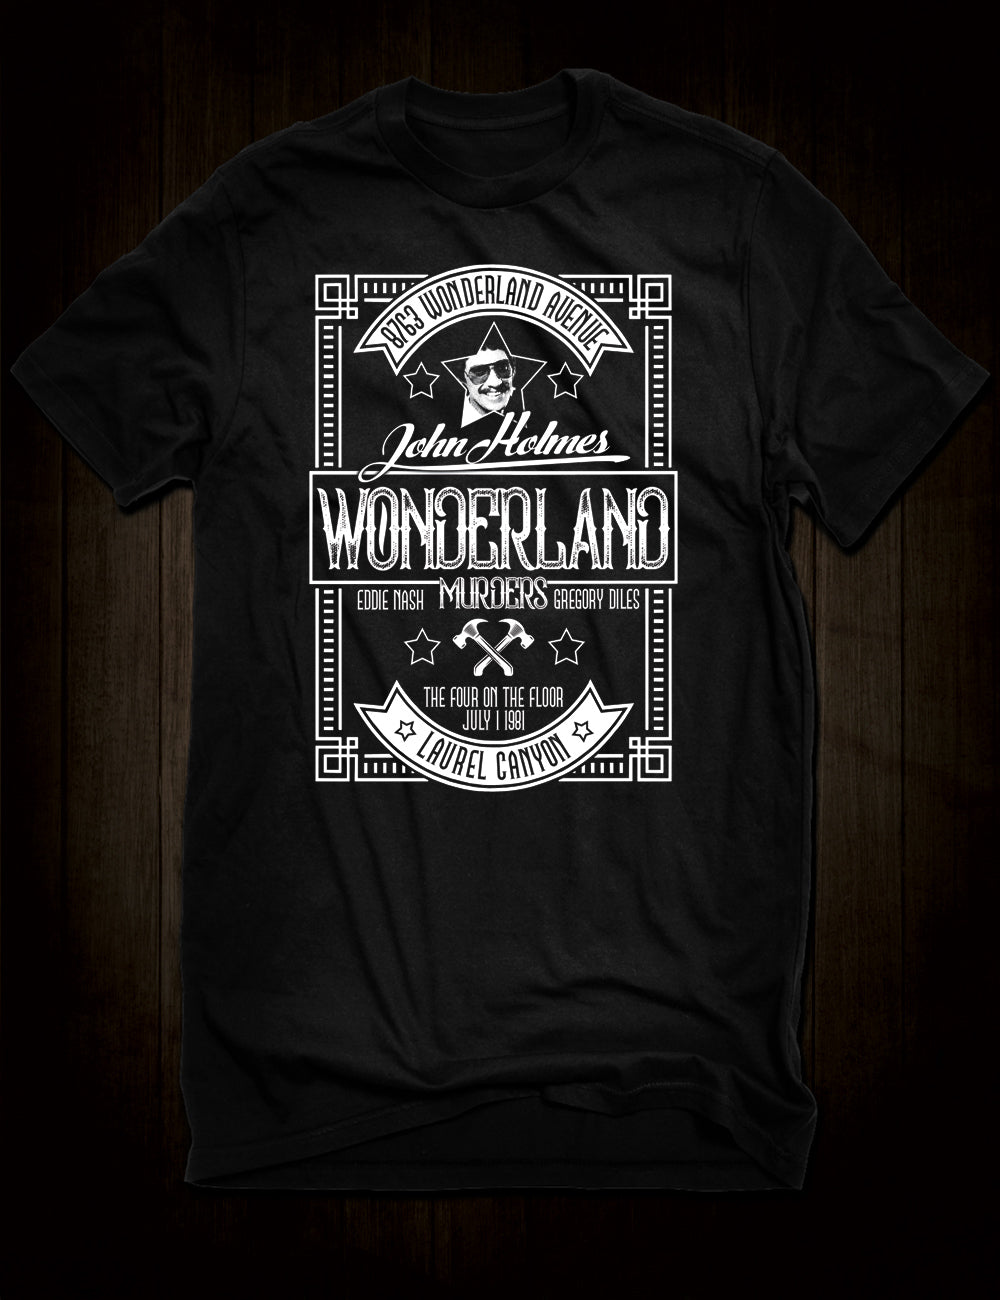 The Wonderland Murders T Shirt Hellwood Outfitters